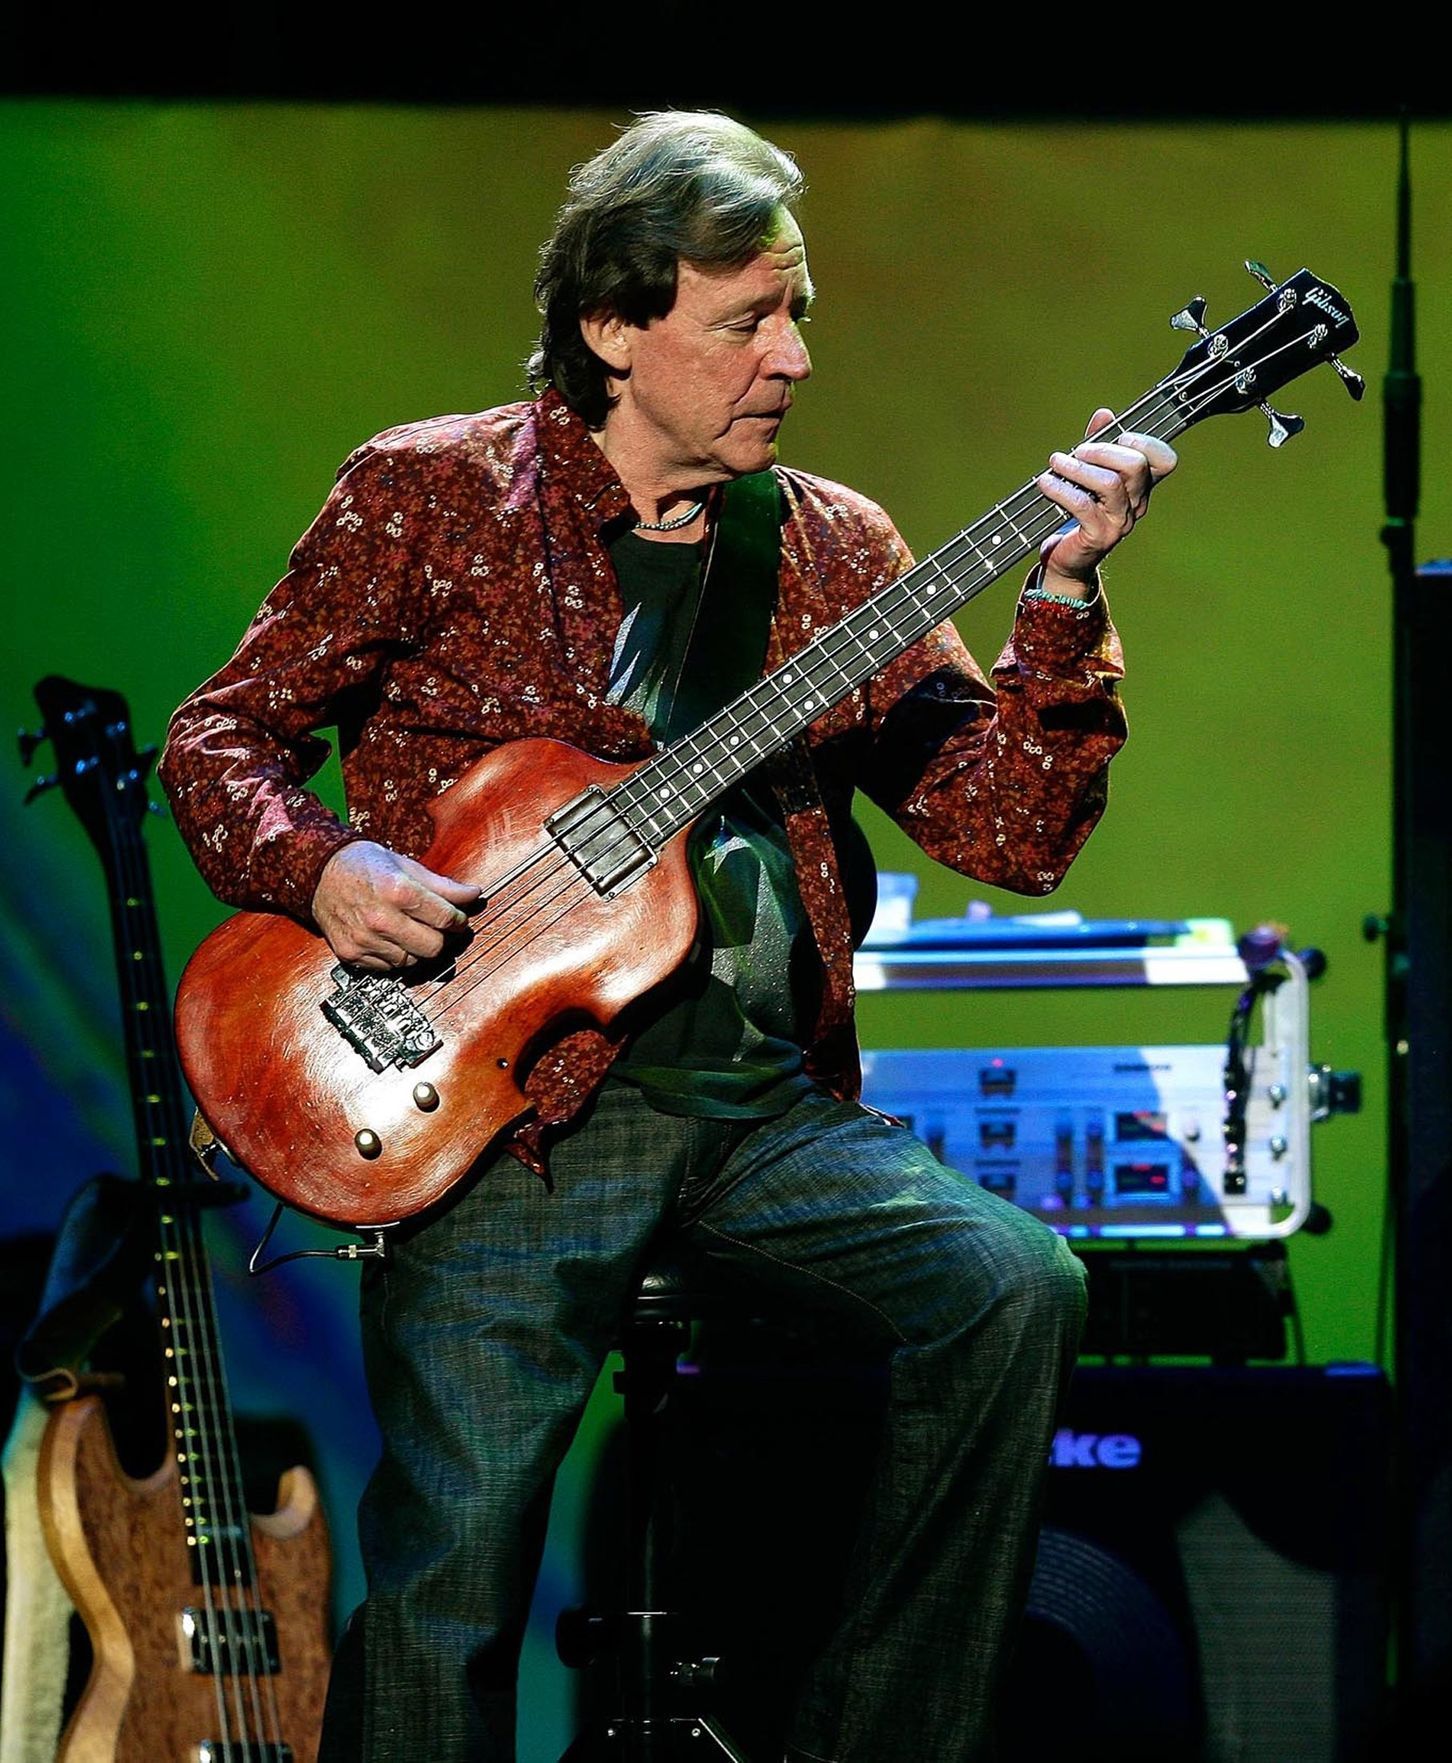 File photograph of bass player Jack Bruce of the supergroup Cream performing during a concert at the Royal Albert Hall in London